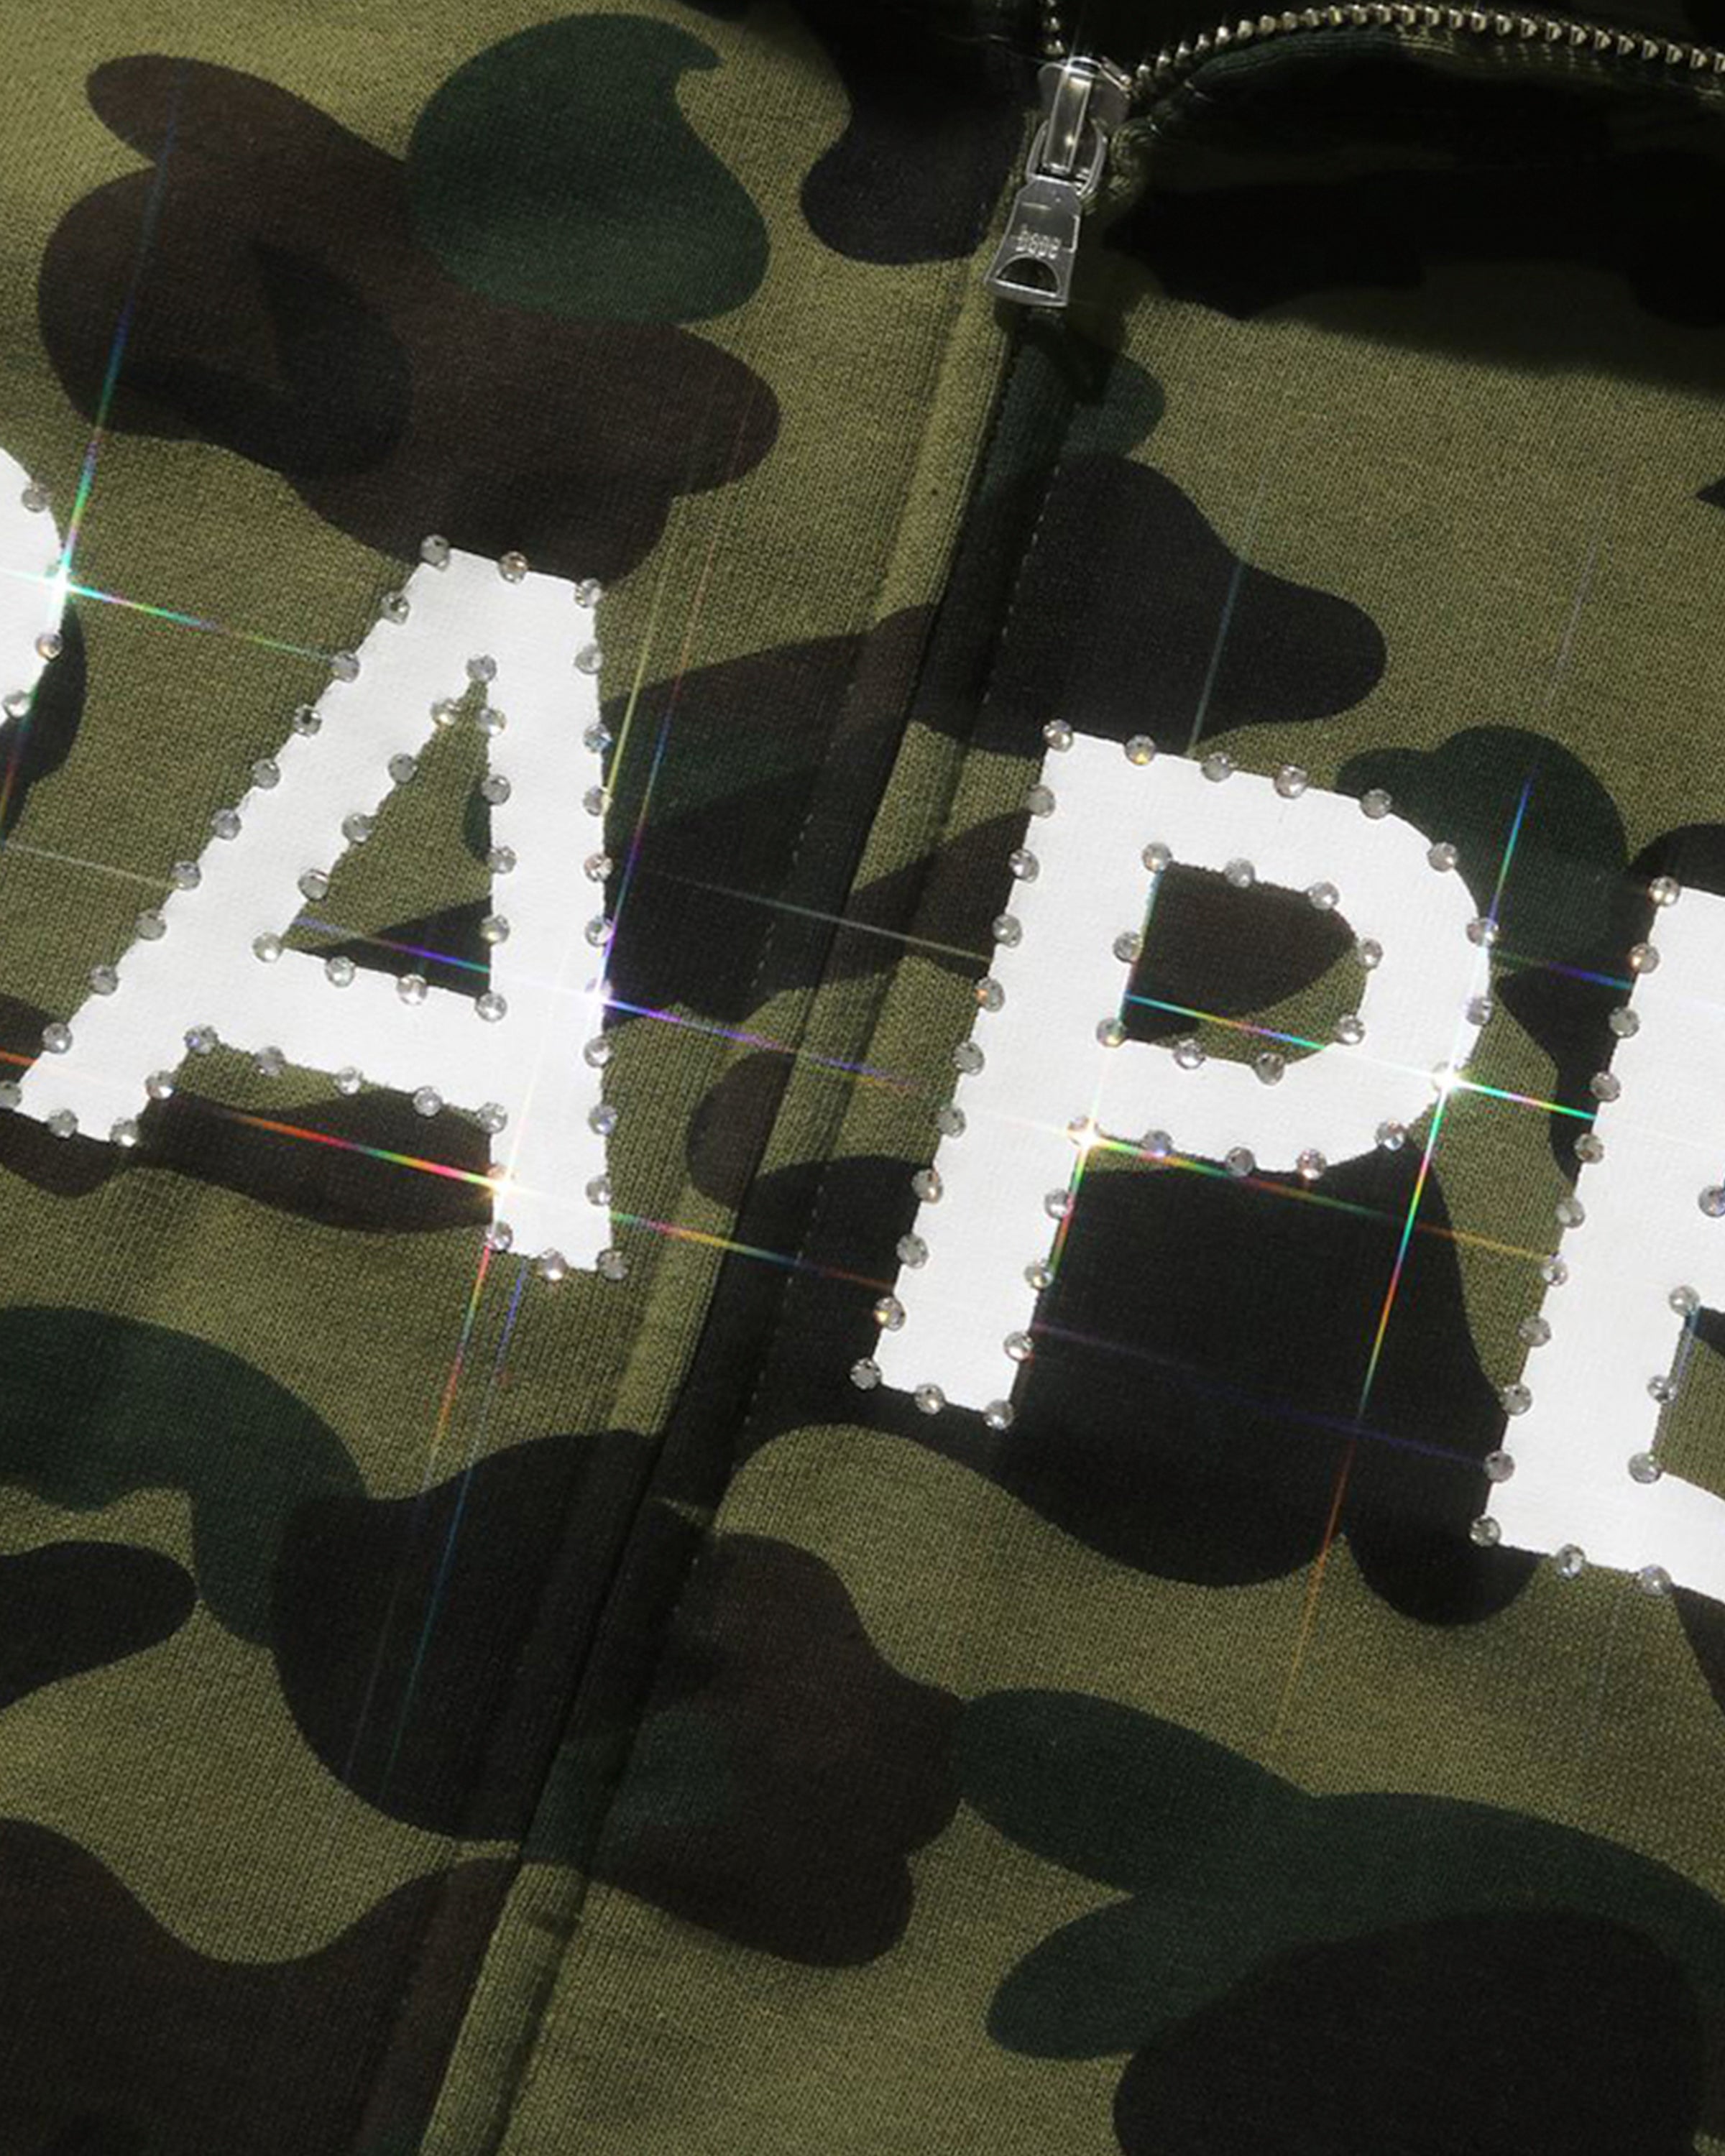 BAPE 1ST CAMO CRYSTAL STONE FULL ZIP HOODIE – Undefeated